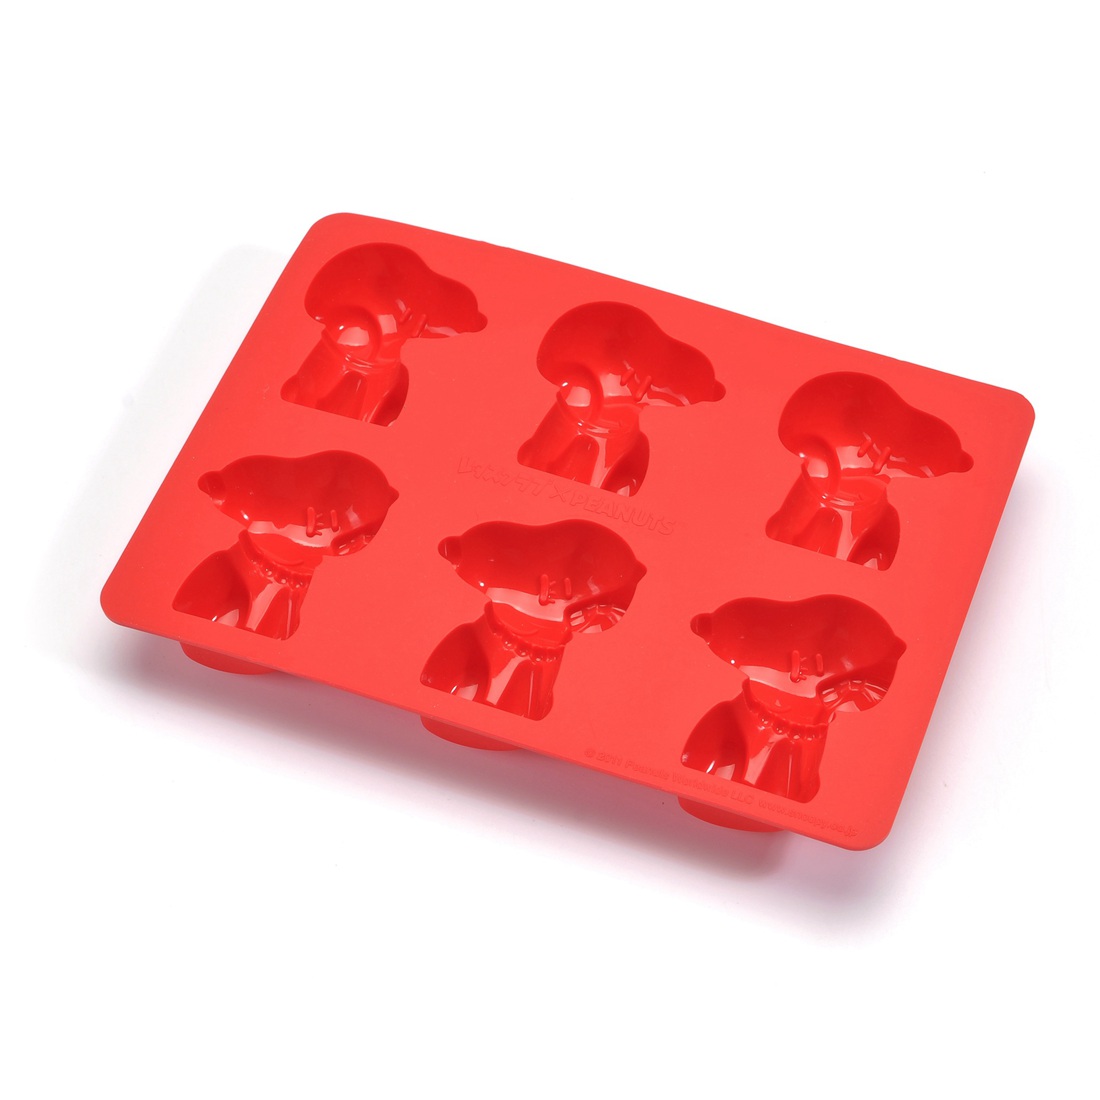 Dog Silicone Ice Cube Maker Jelly Chocolate candy Cake Mold Tray